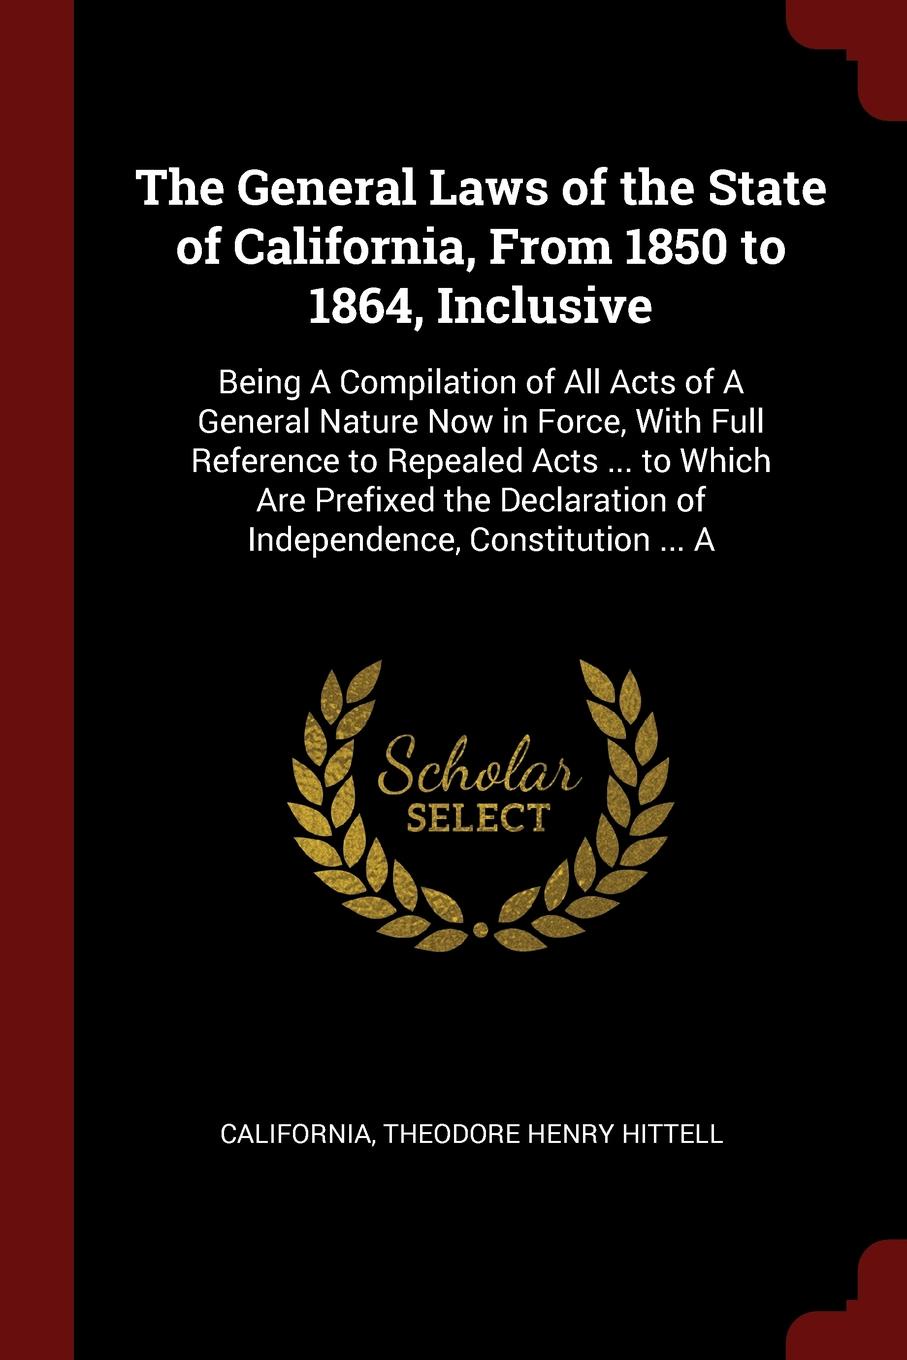 The General Laws of the State of California, From 1850 to 1864, Inclusive. Being A Compilation of All Acts of A General Nature Now in Force, With Full Reference to Repealed Acts ... to Which Are Prefixed the Declaration of Independence, Constituti...